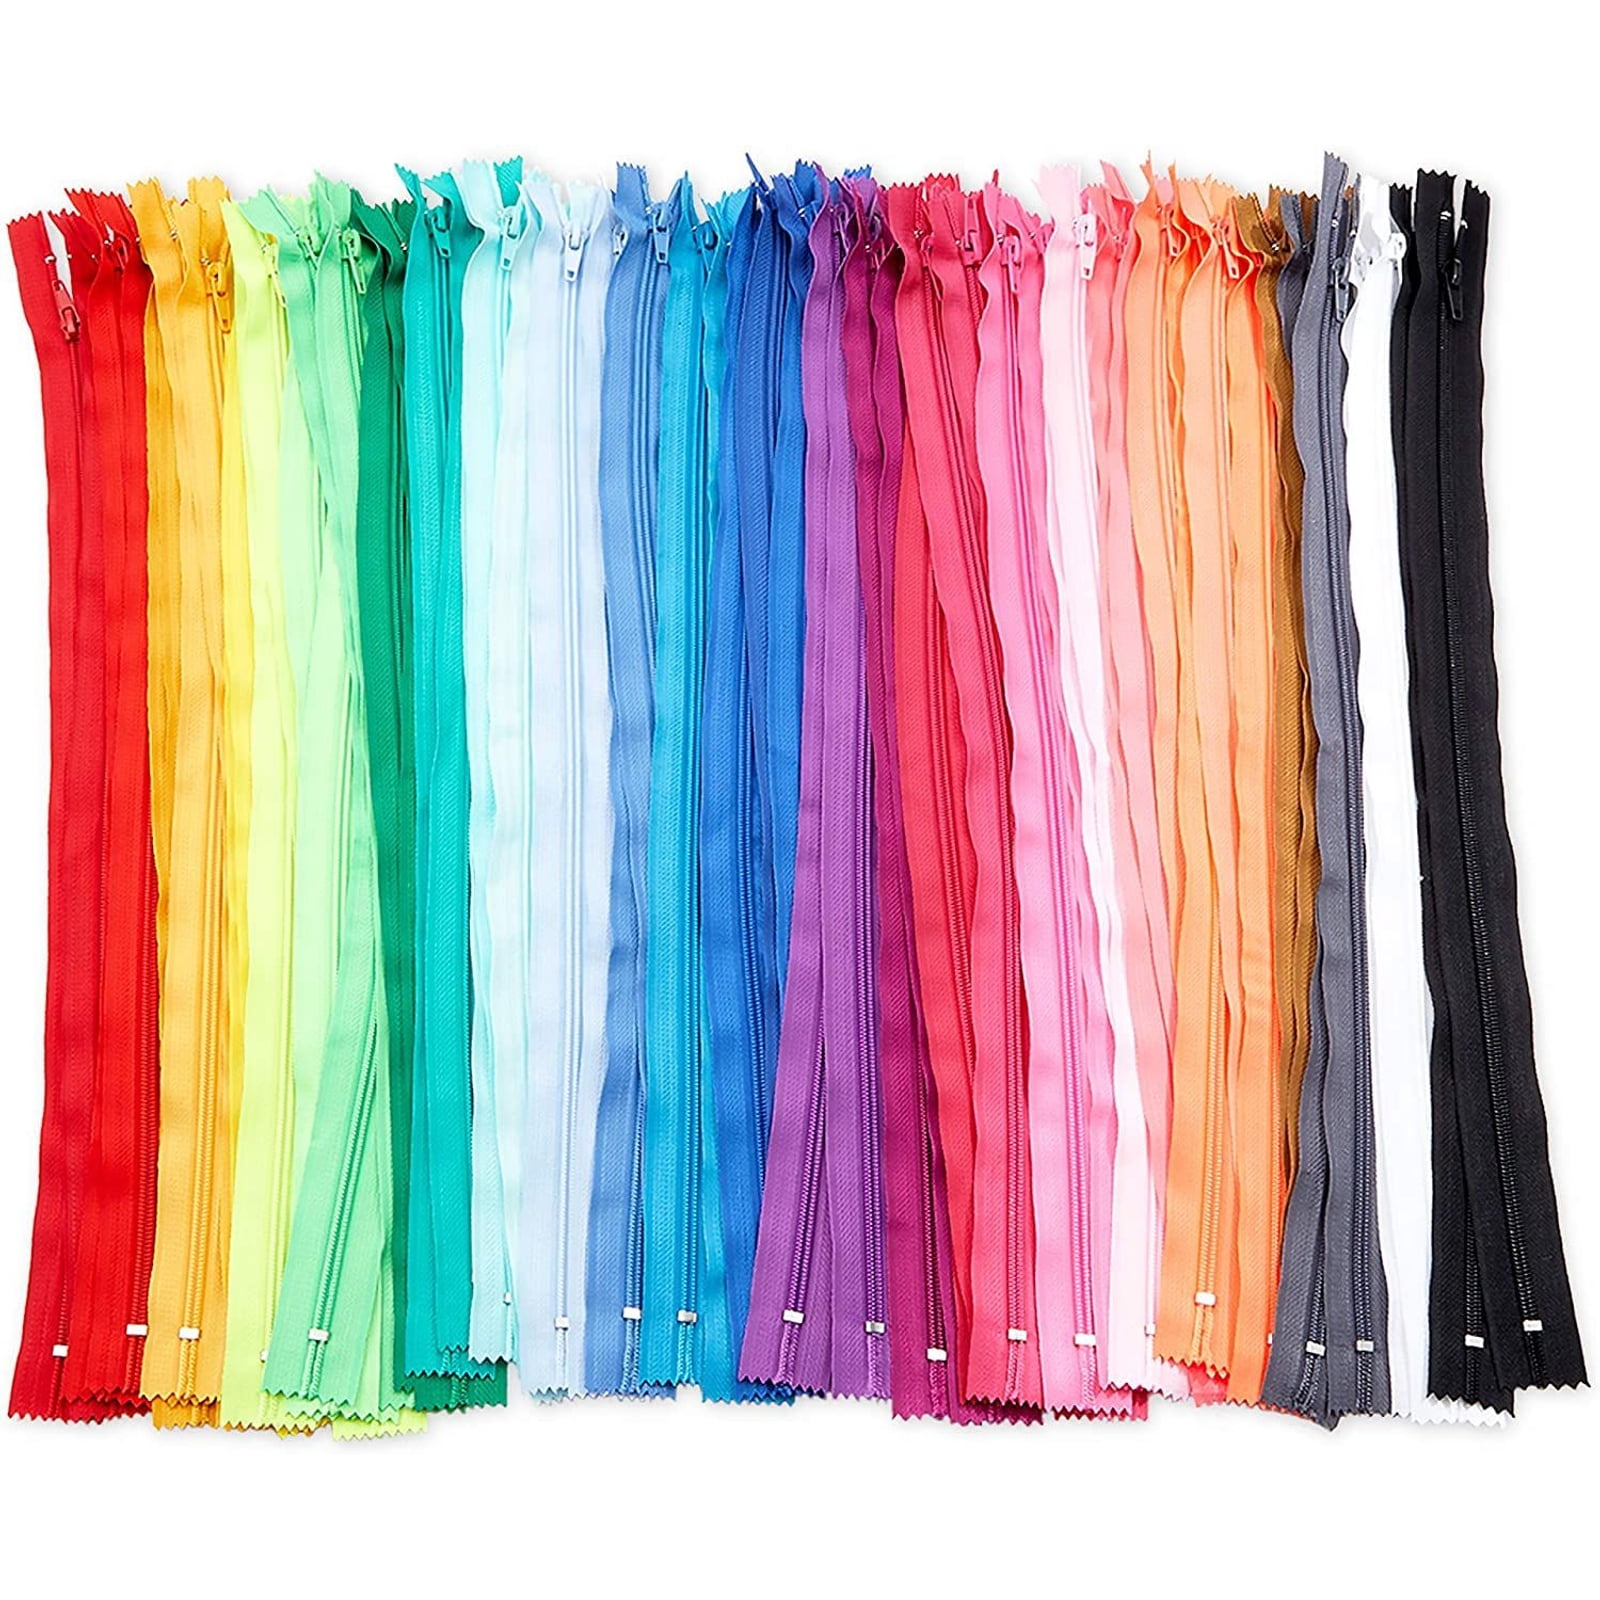 5# Nylon Zippers for Sewing Bags Plastic Coil Bag Zipper Tapes By The Meter  Purse Garment Zips Repair DIY Clothing Accessories